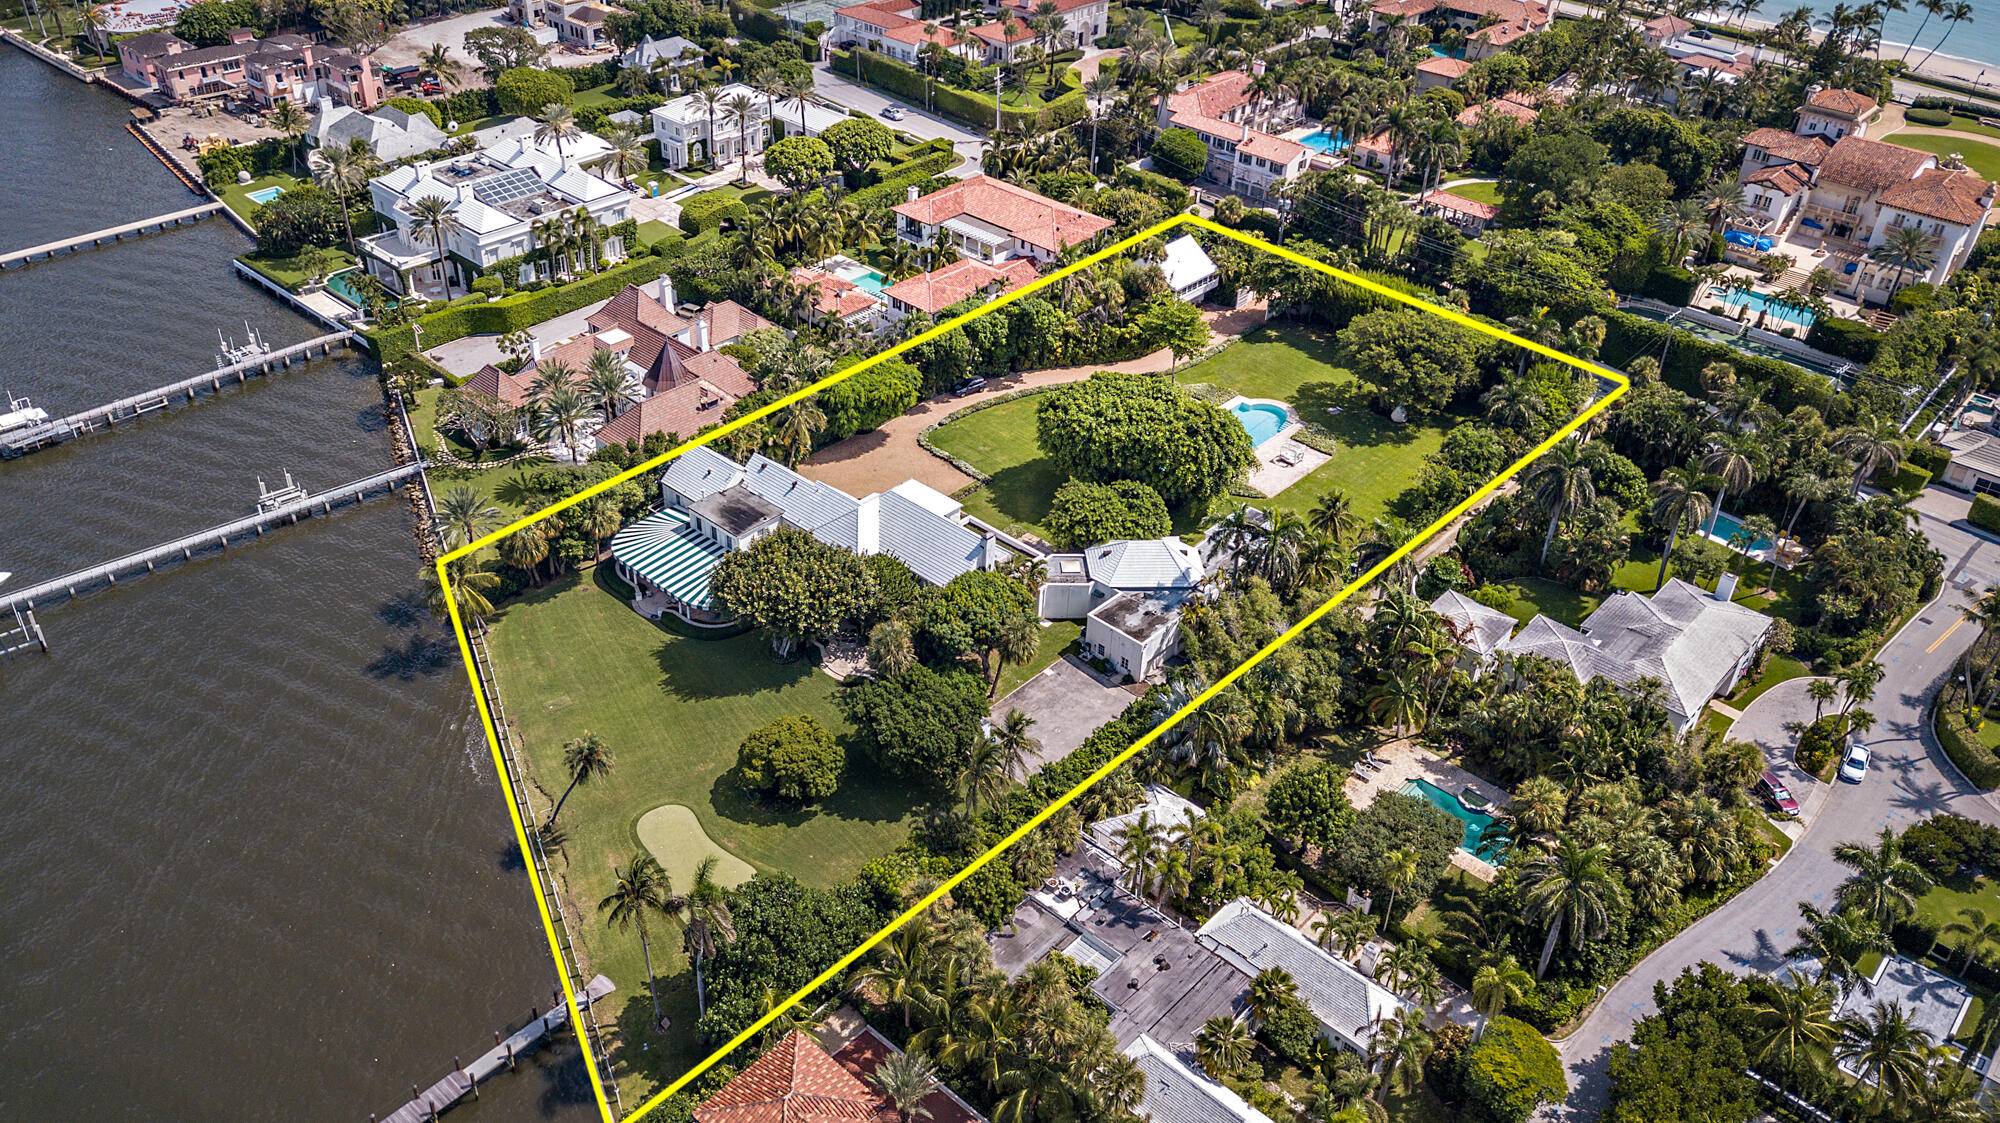 The ONLY opportunity available in Palm Beach for purchase at this time, expanding 2 acres across the intracoastal.